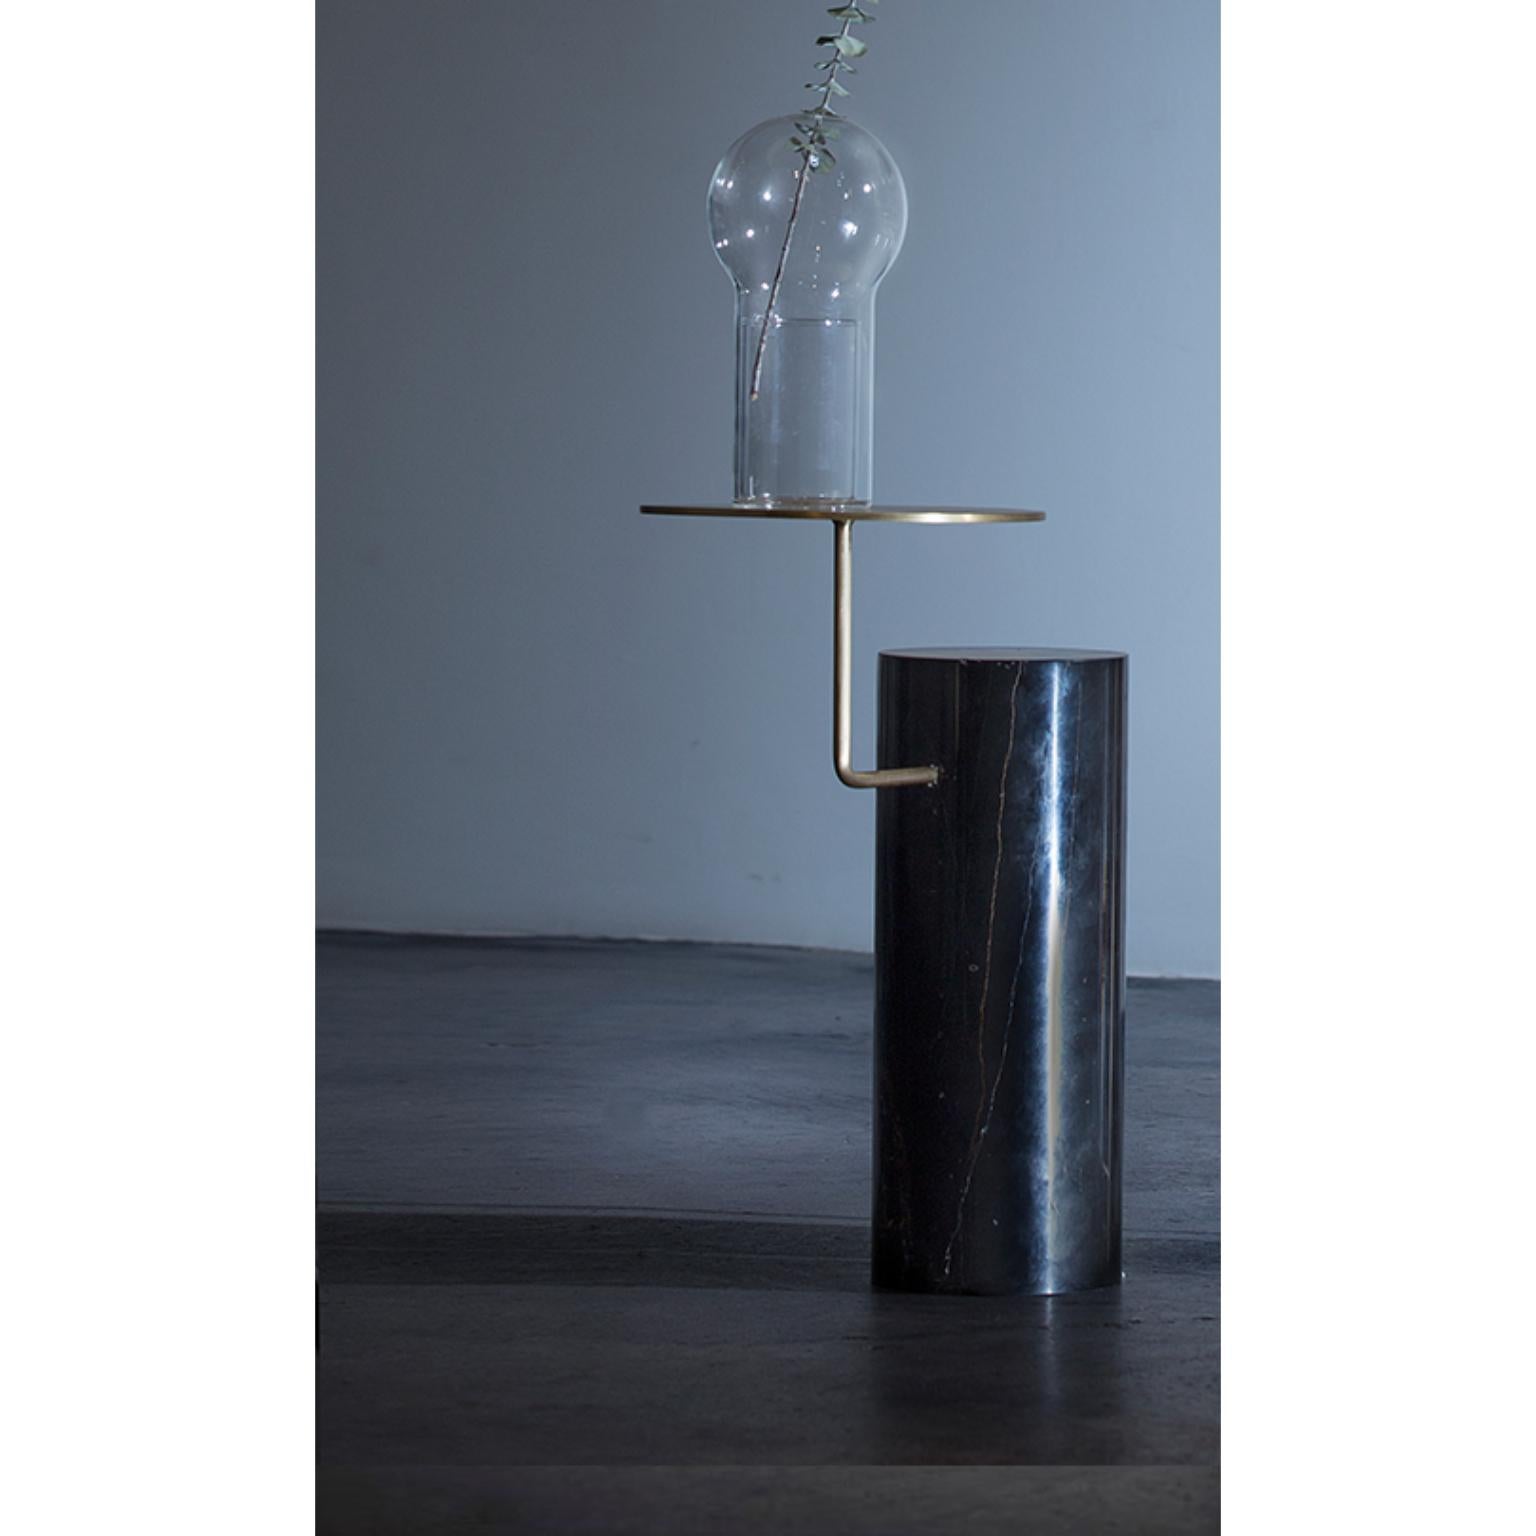 Unique masnad brass side table by Borgi Bastormagi
Dimensions: W 25 x D 36 x H 52 cm
Material: Brushed brass, marble
Also available in black steel, brushed stainless steel, and with steel plate.

Part of the folliland collection, Masnad is a